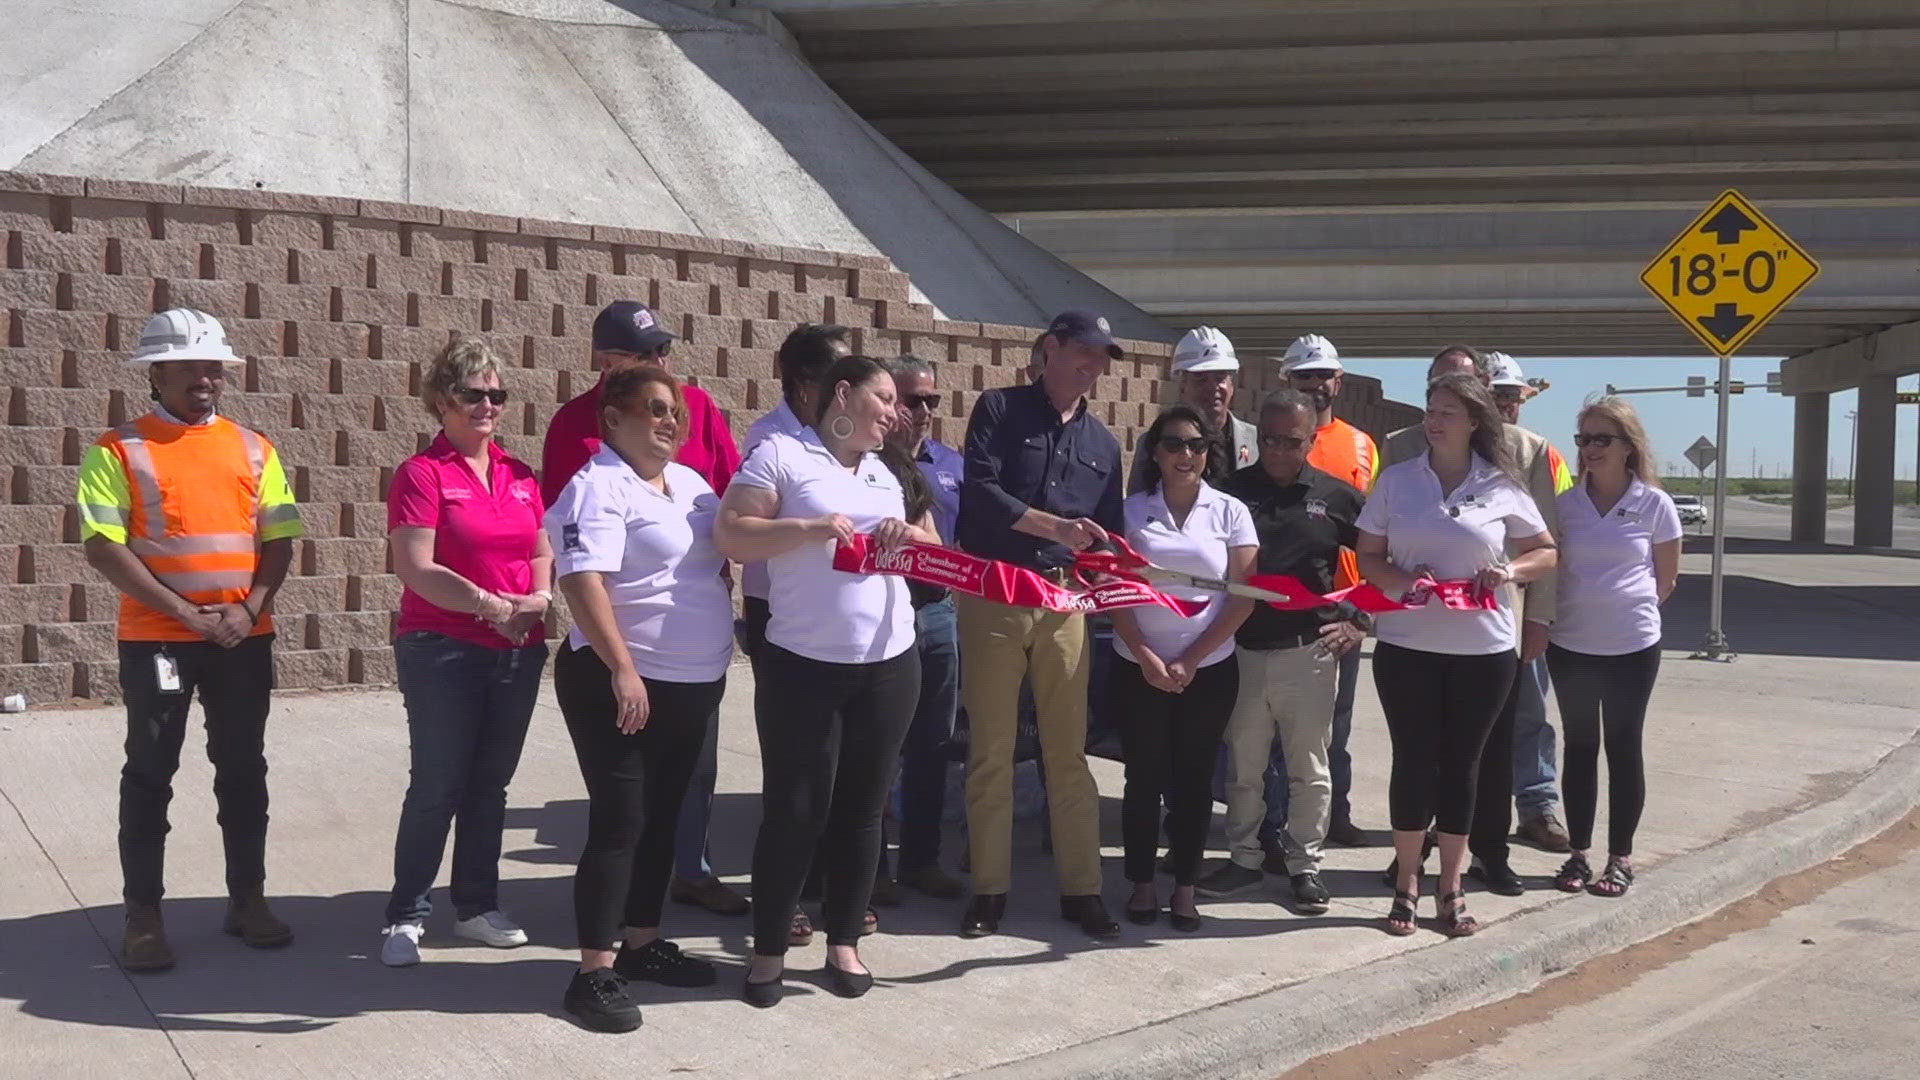 State Representative Brooks Landgraf and Odessa Mayor Javier Joven were among the attendees at the ribbon cutting Friday morning.